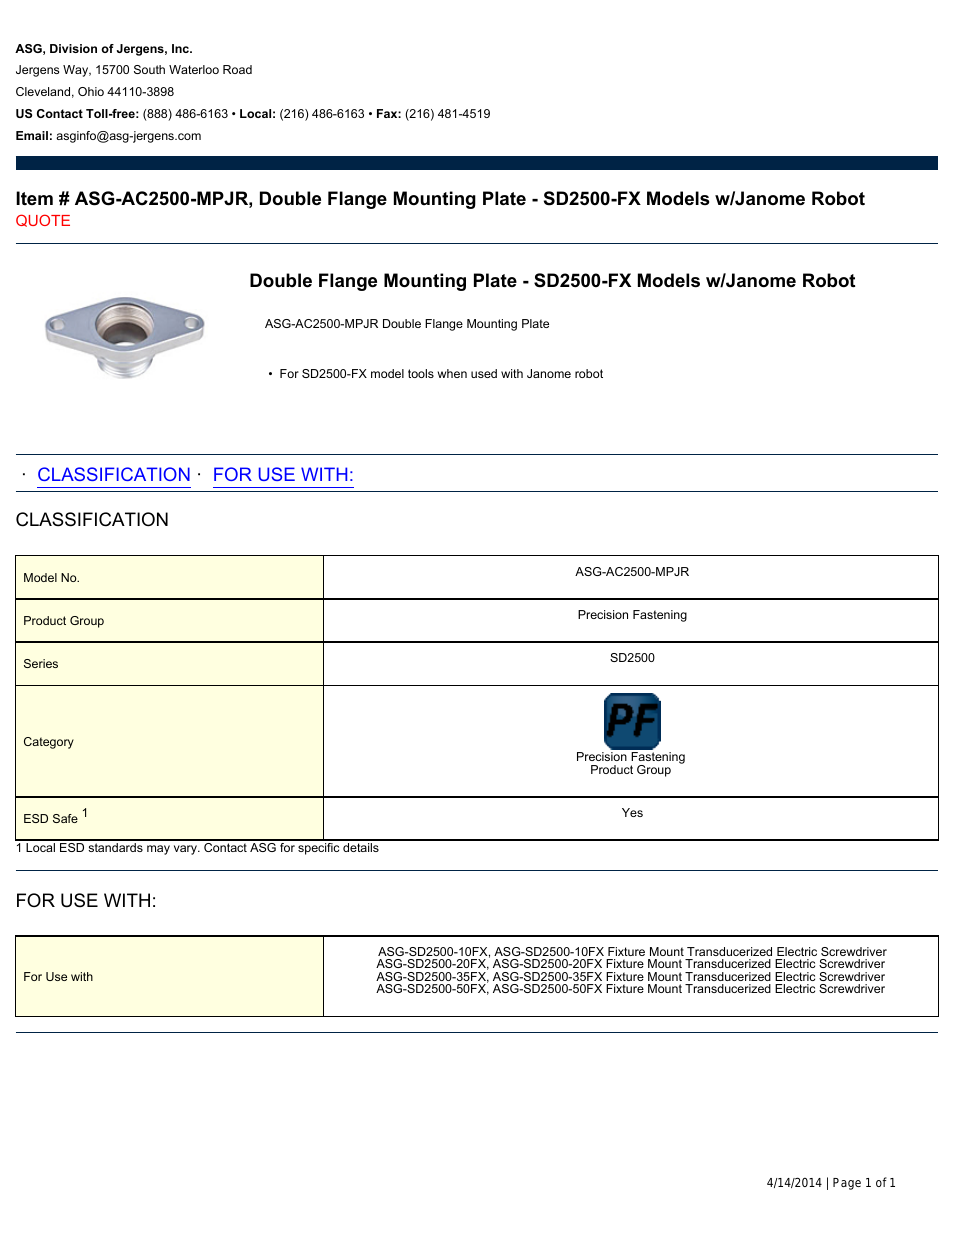 ASG-AC2500-MPJR Double Flange Mounting Plate - SD2500-FX